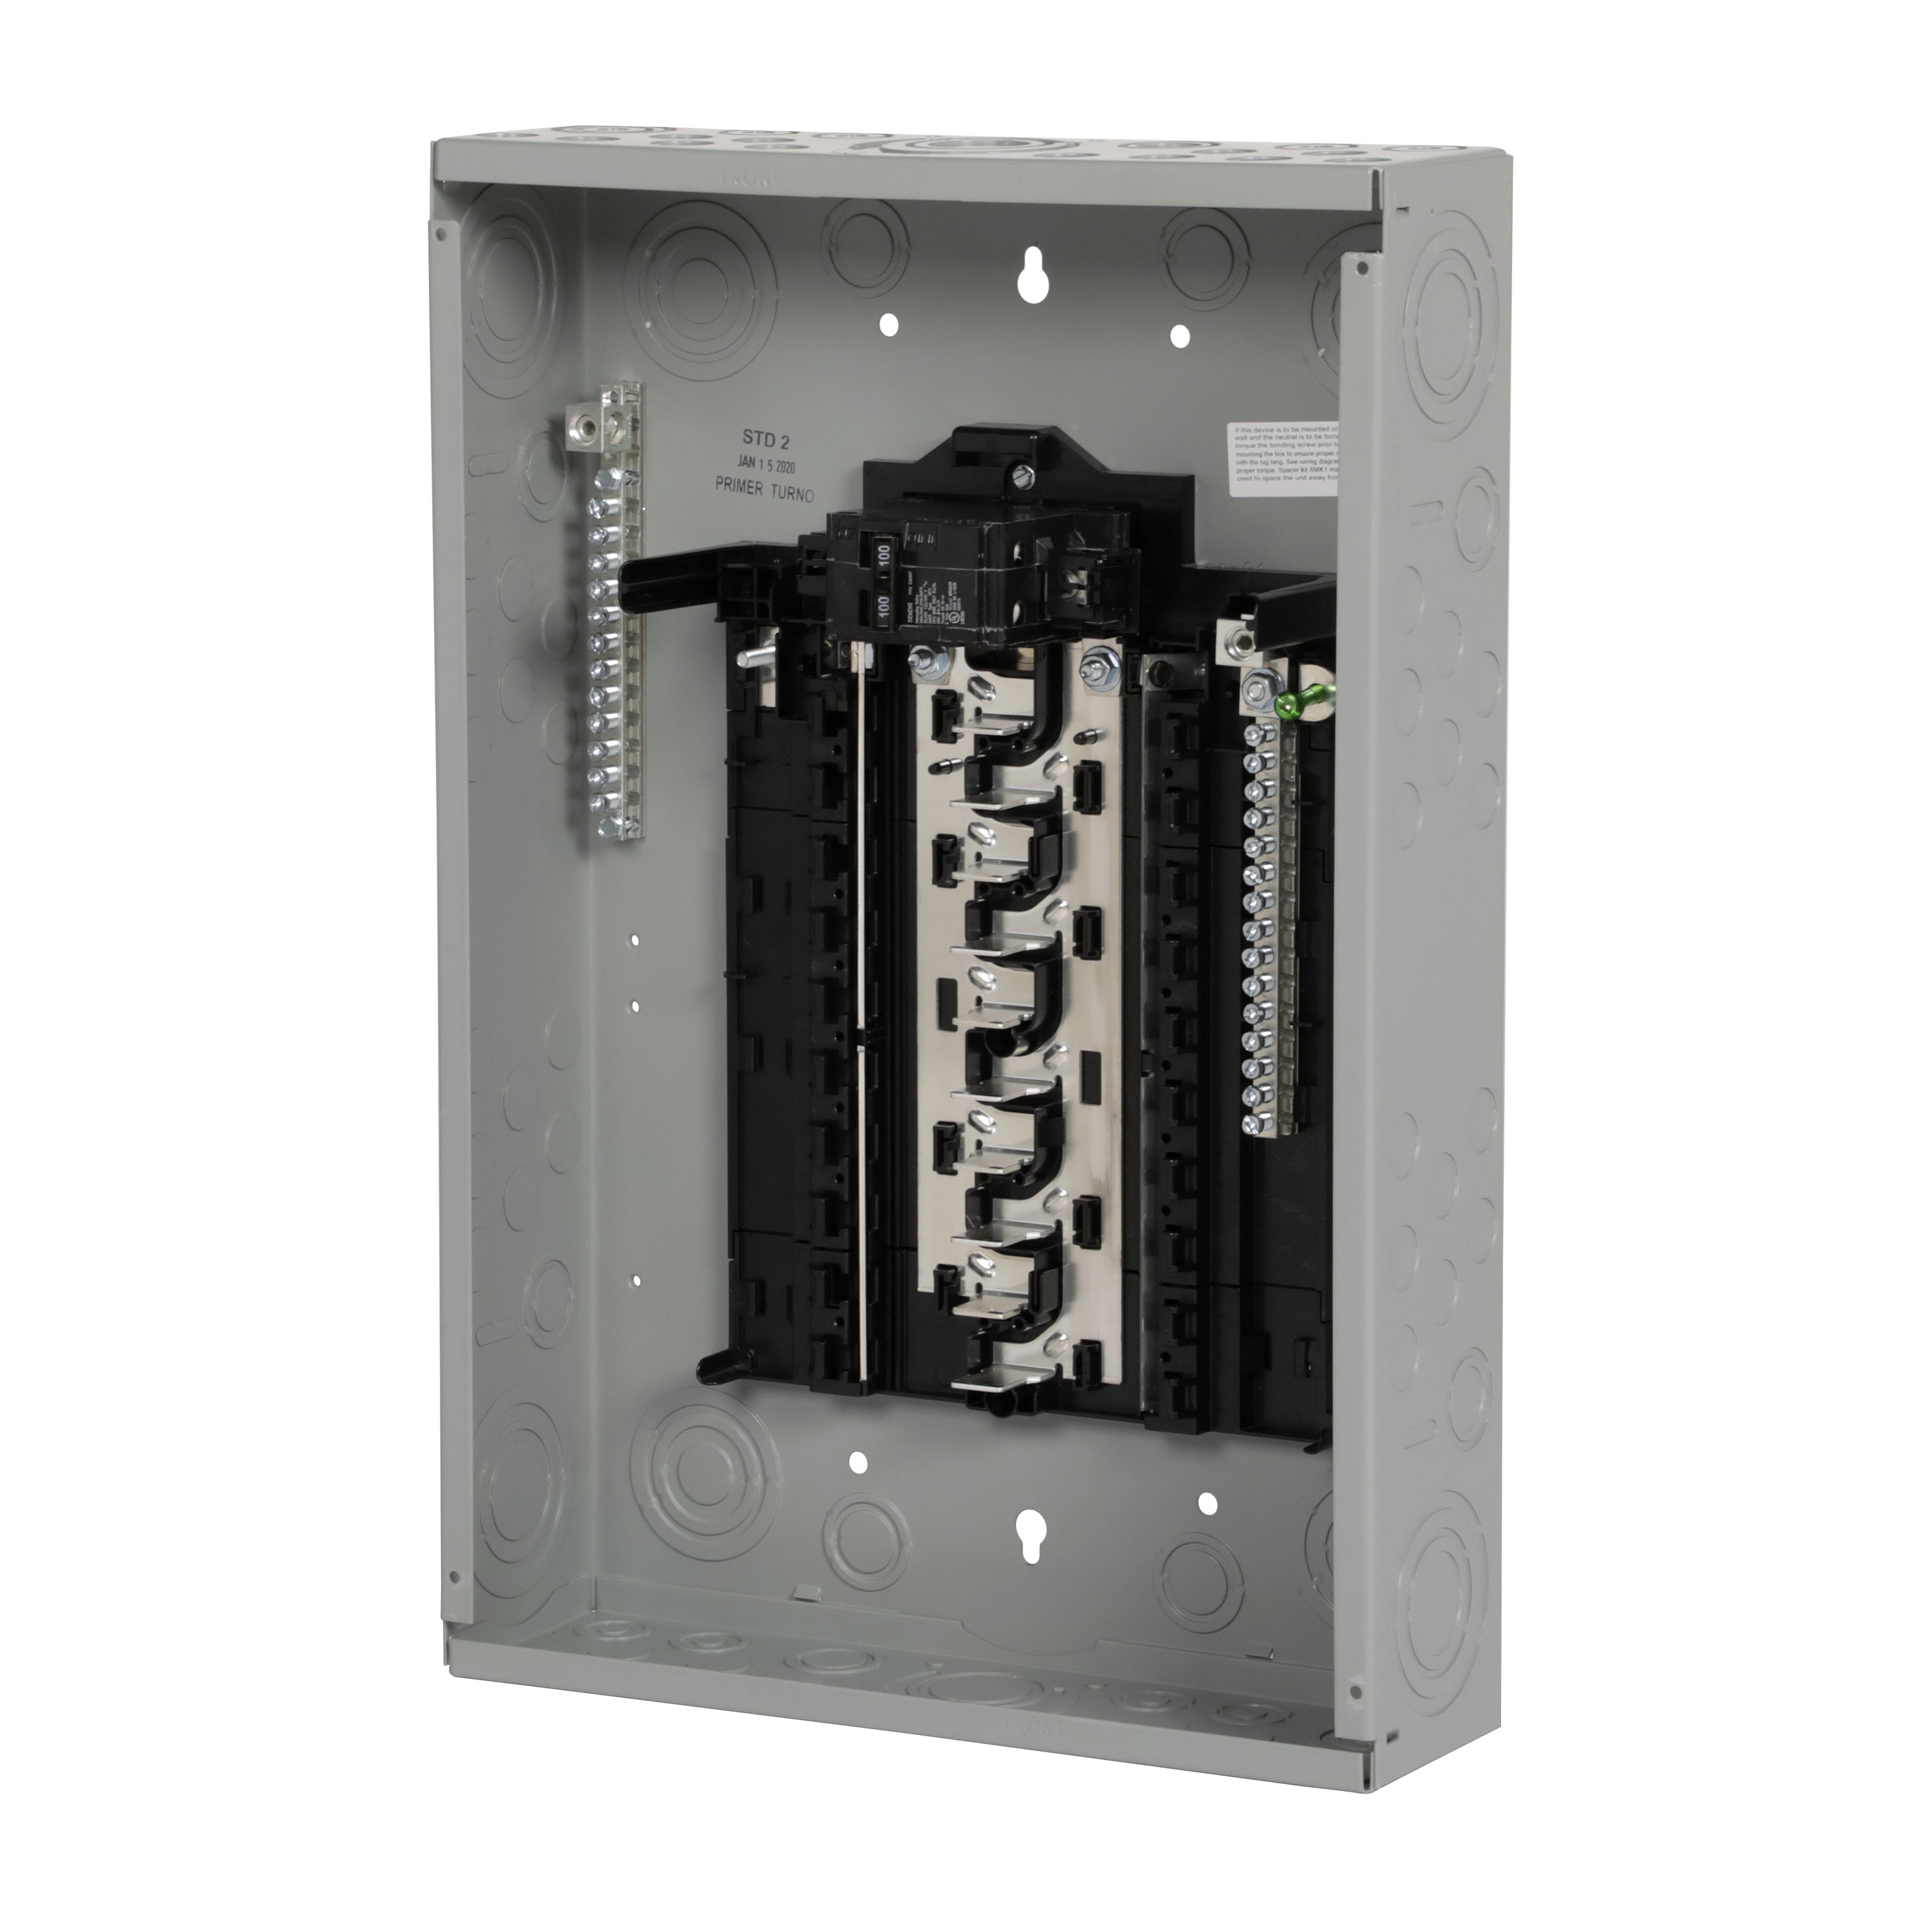 SIEMENS LOW VOLTAGE PLUG-ON NEUTRAL READY STANDARD SERIES ASSEMBLED LOAD CENTER. MAIN BREAKER WITH 20 1-INCH SPACES ALLOWING MAX 20 CIRCUITS. 1-PHASE 3-WIRE SYSTEM RATED 120/240V (100A) 22KAIC. SPECIAL FEATURES ALUMINUM BUS, GREY TRIM NEMATYPE 1 ENCLOSURE FOR INDOOR USE.